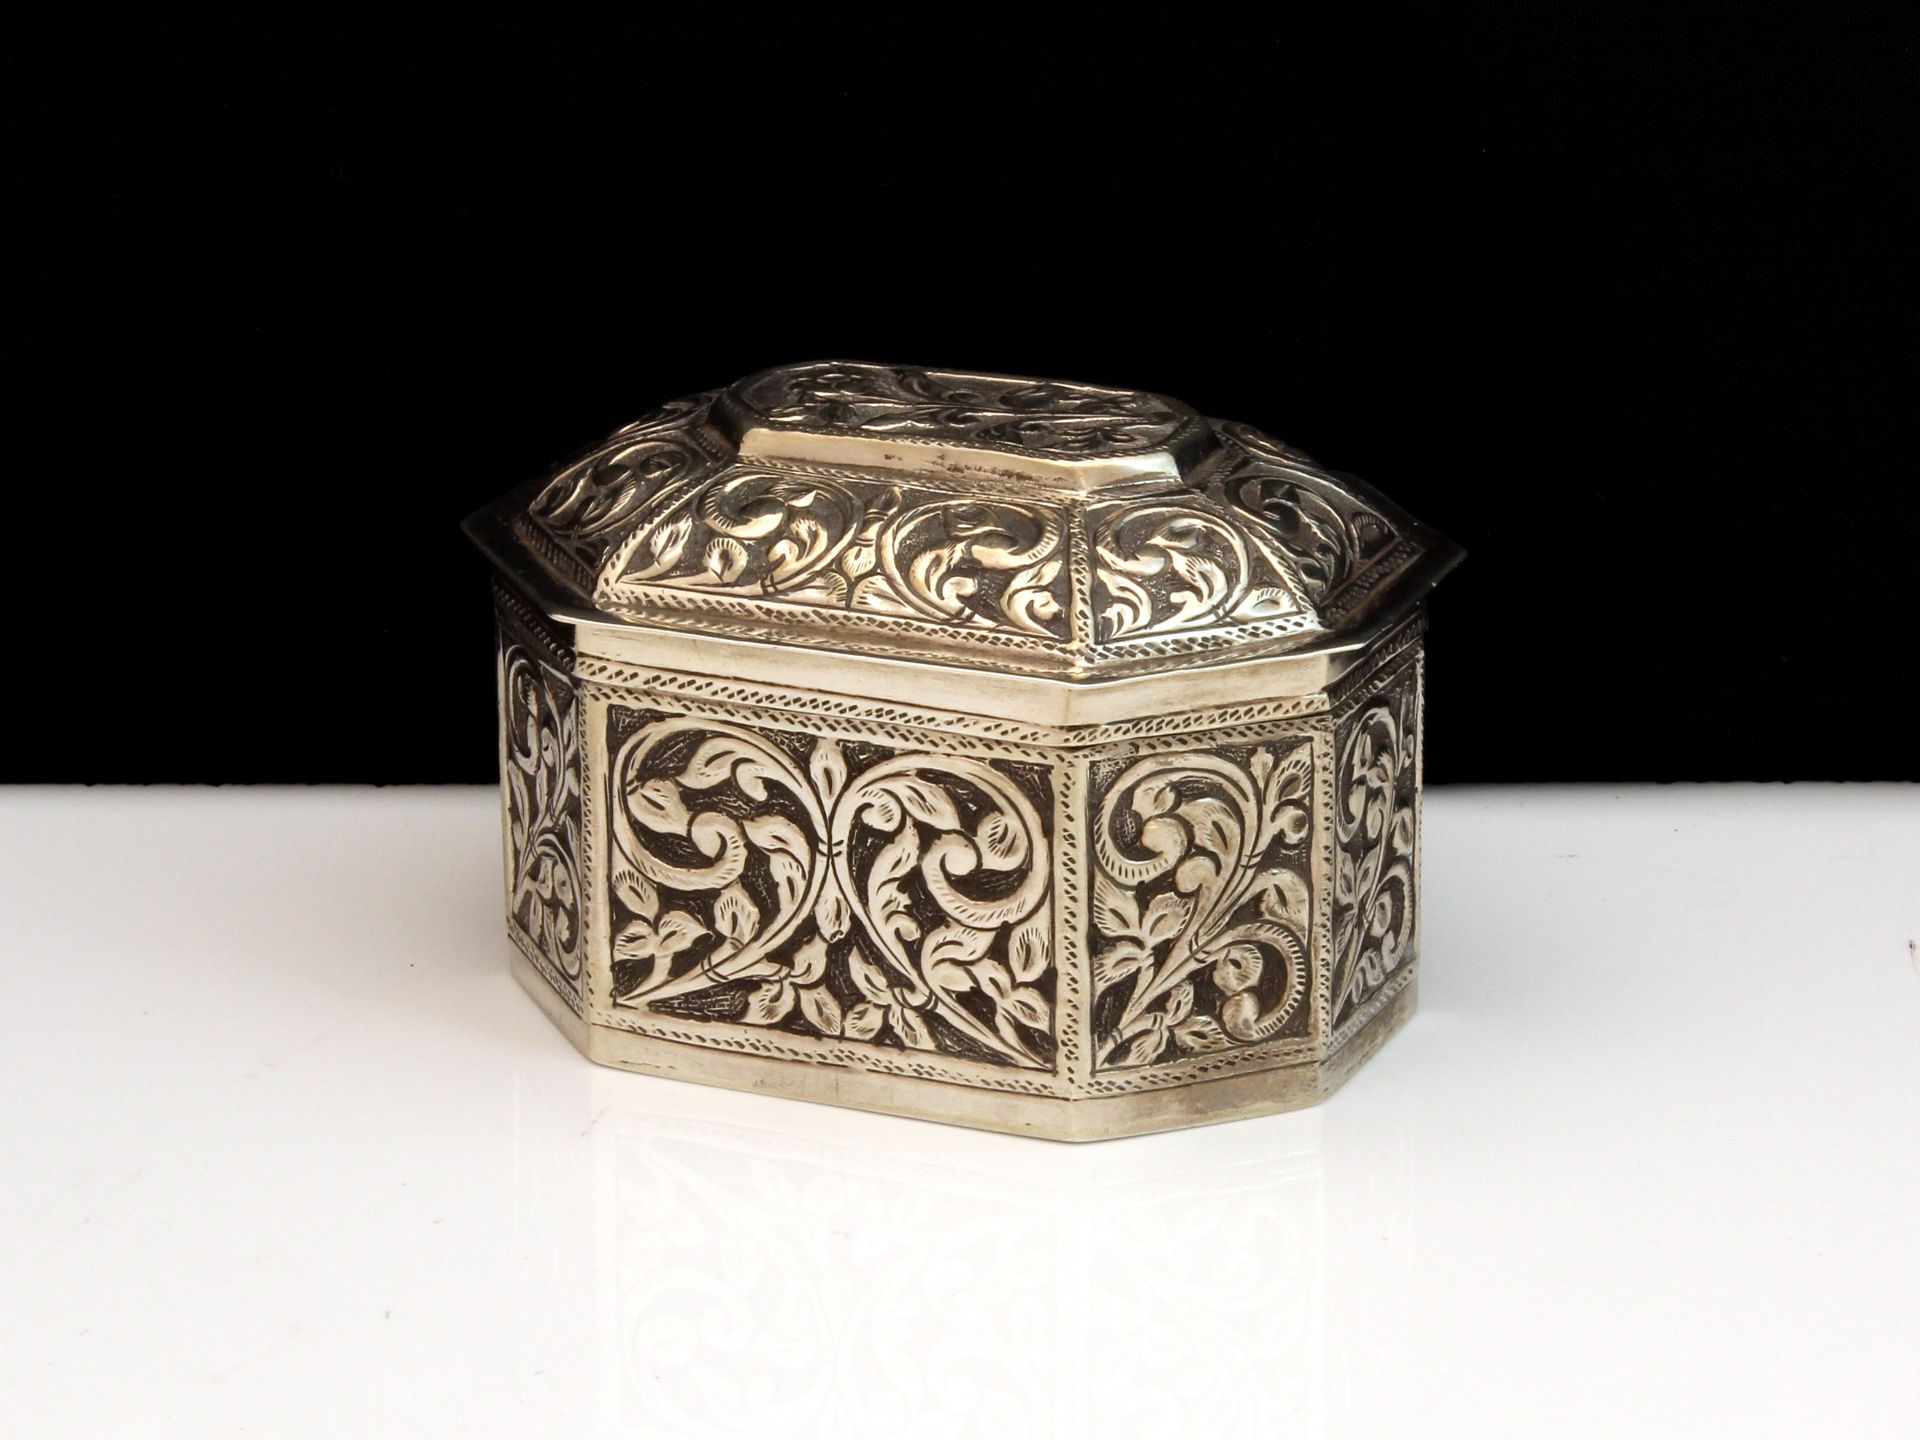 An antique German Silver ring / trinket box stamped 800 of cut cornered rectangular form with a